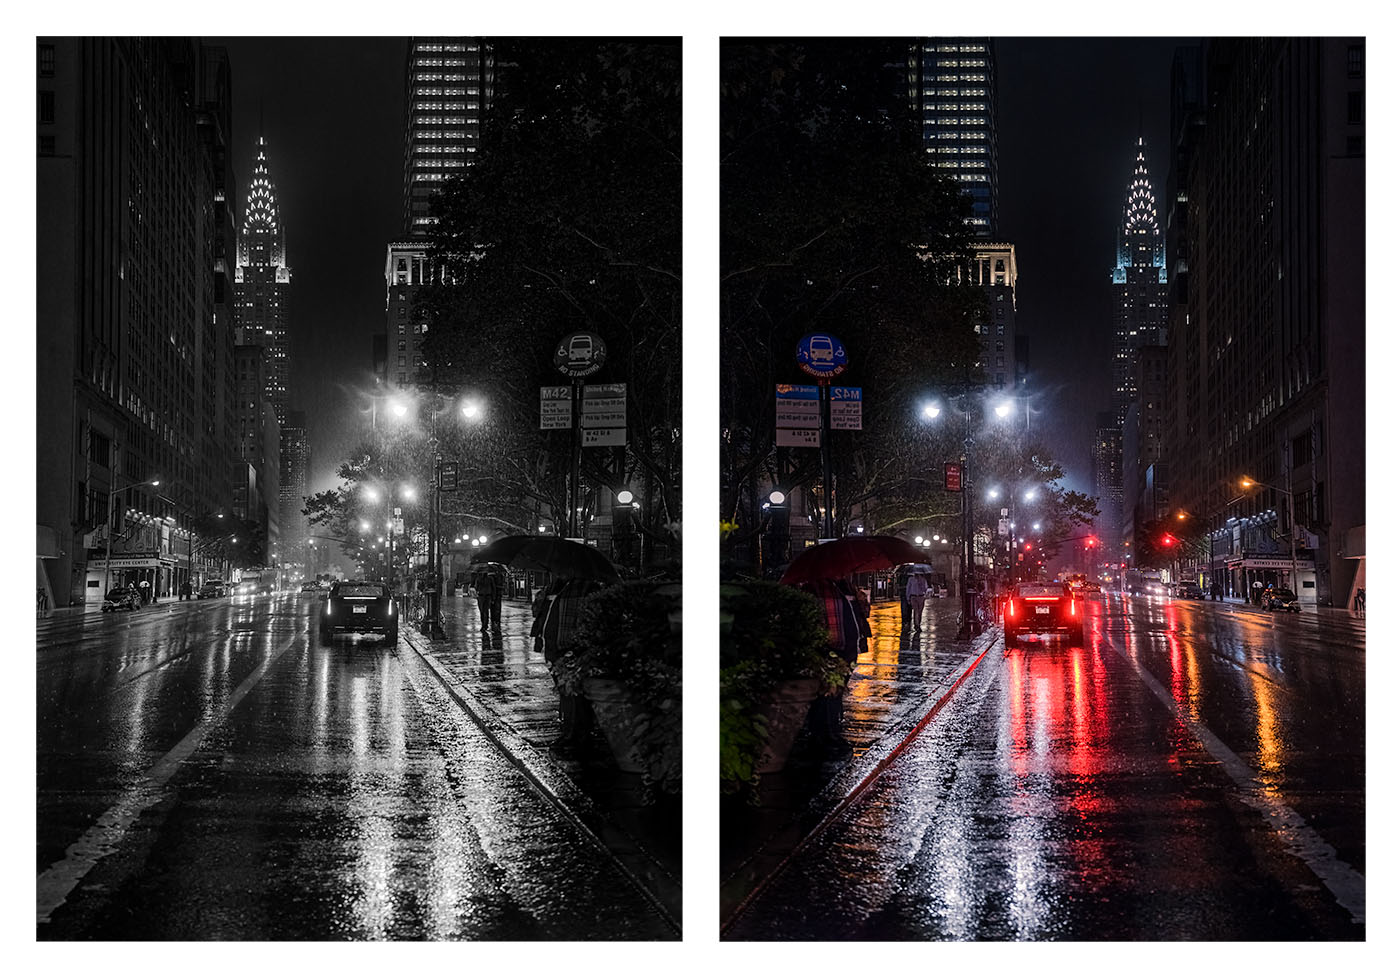 Julia Anna Gospodarou Duality New York in Color and black and white - complete guide to night photography